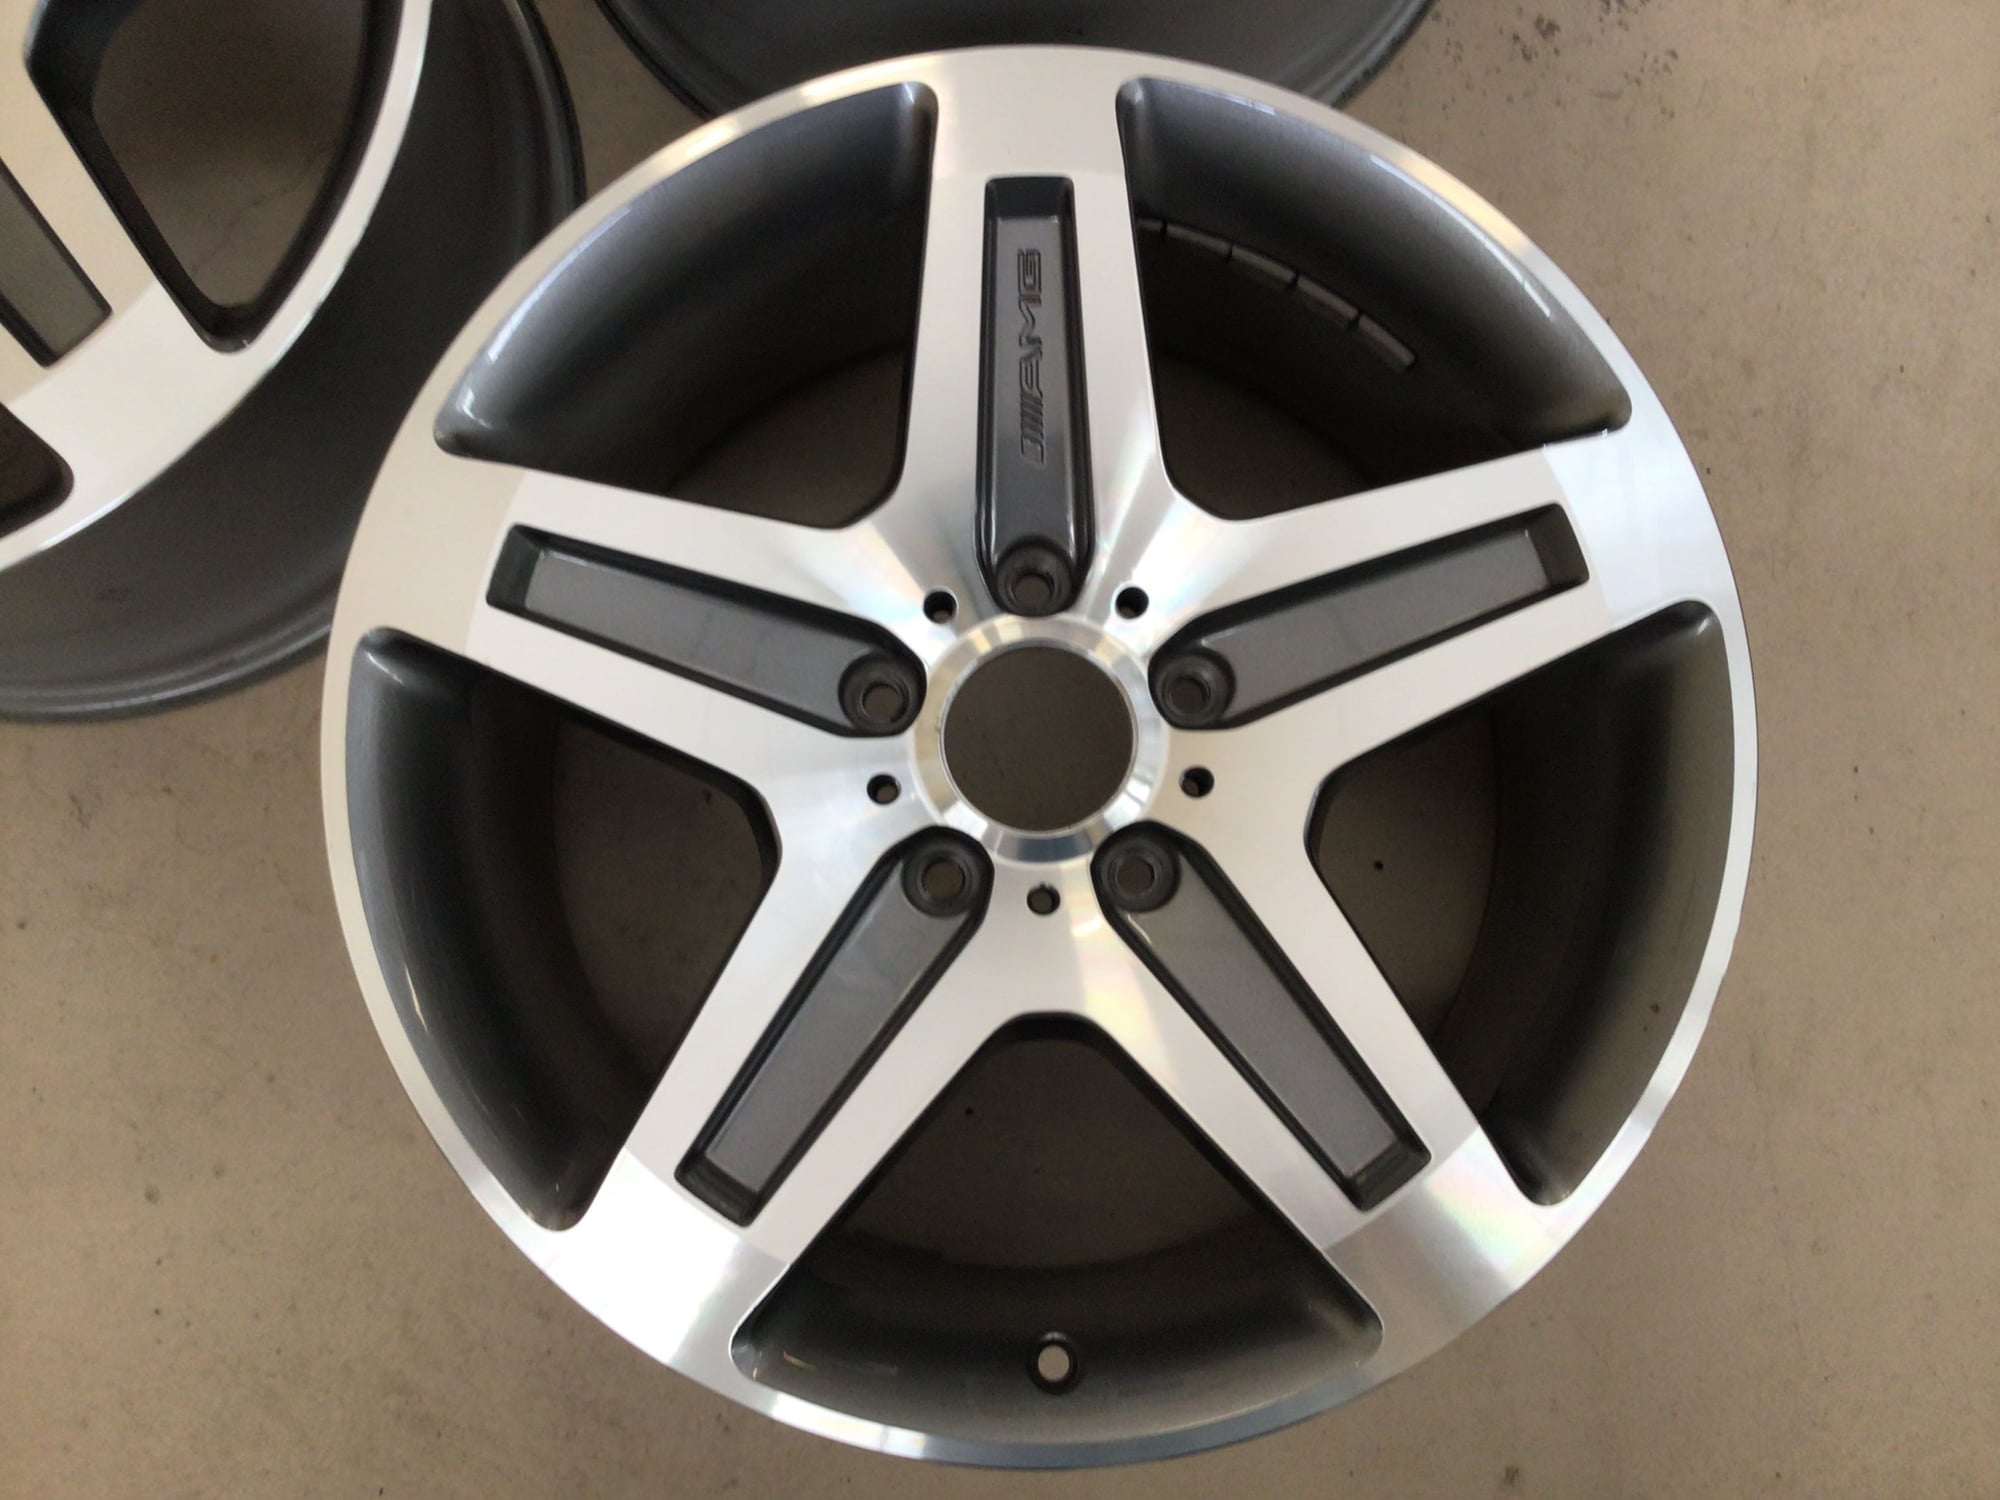 Wheels and Tires/Axles - 19” G55 wheels - Used - 2011 Mercedes-Benz G55 AMG - Saint Johns, FL 32259, United States